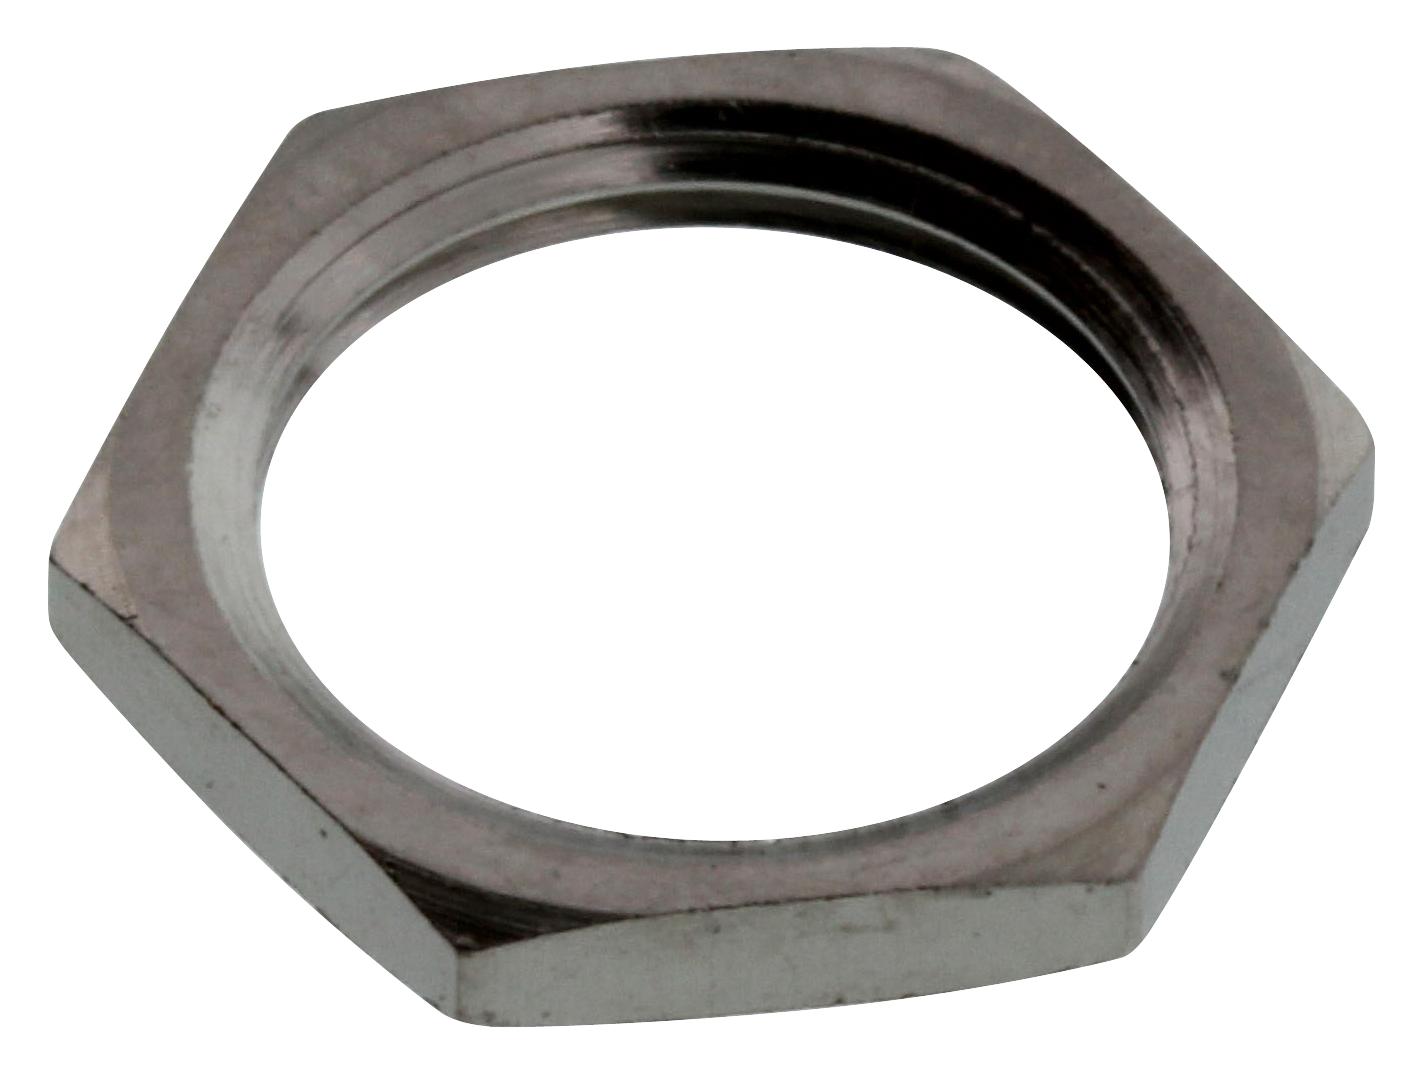 C&k Components 707100201 Mounting Hex Nut, 15/32-32 Ns, Switch